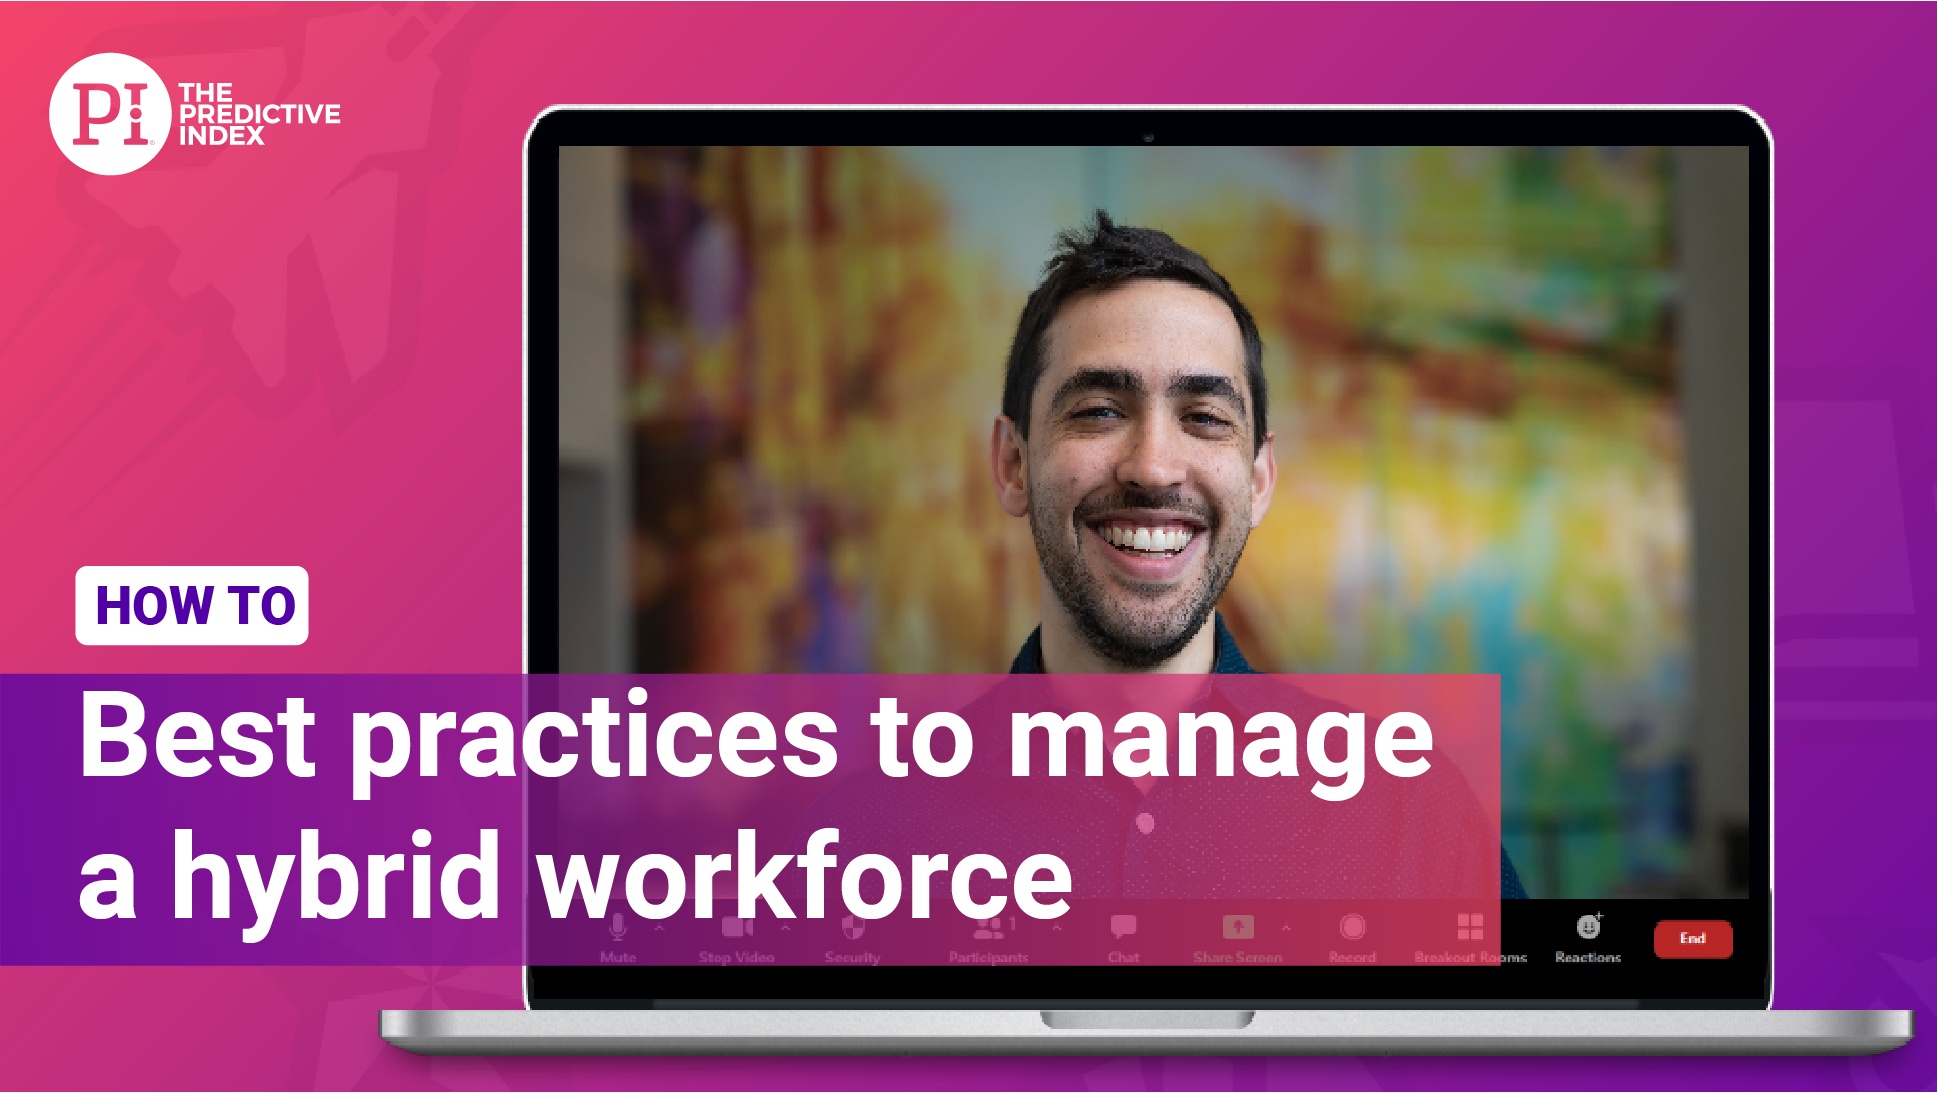 How to manage a hybrid workforce